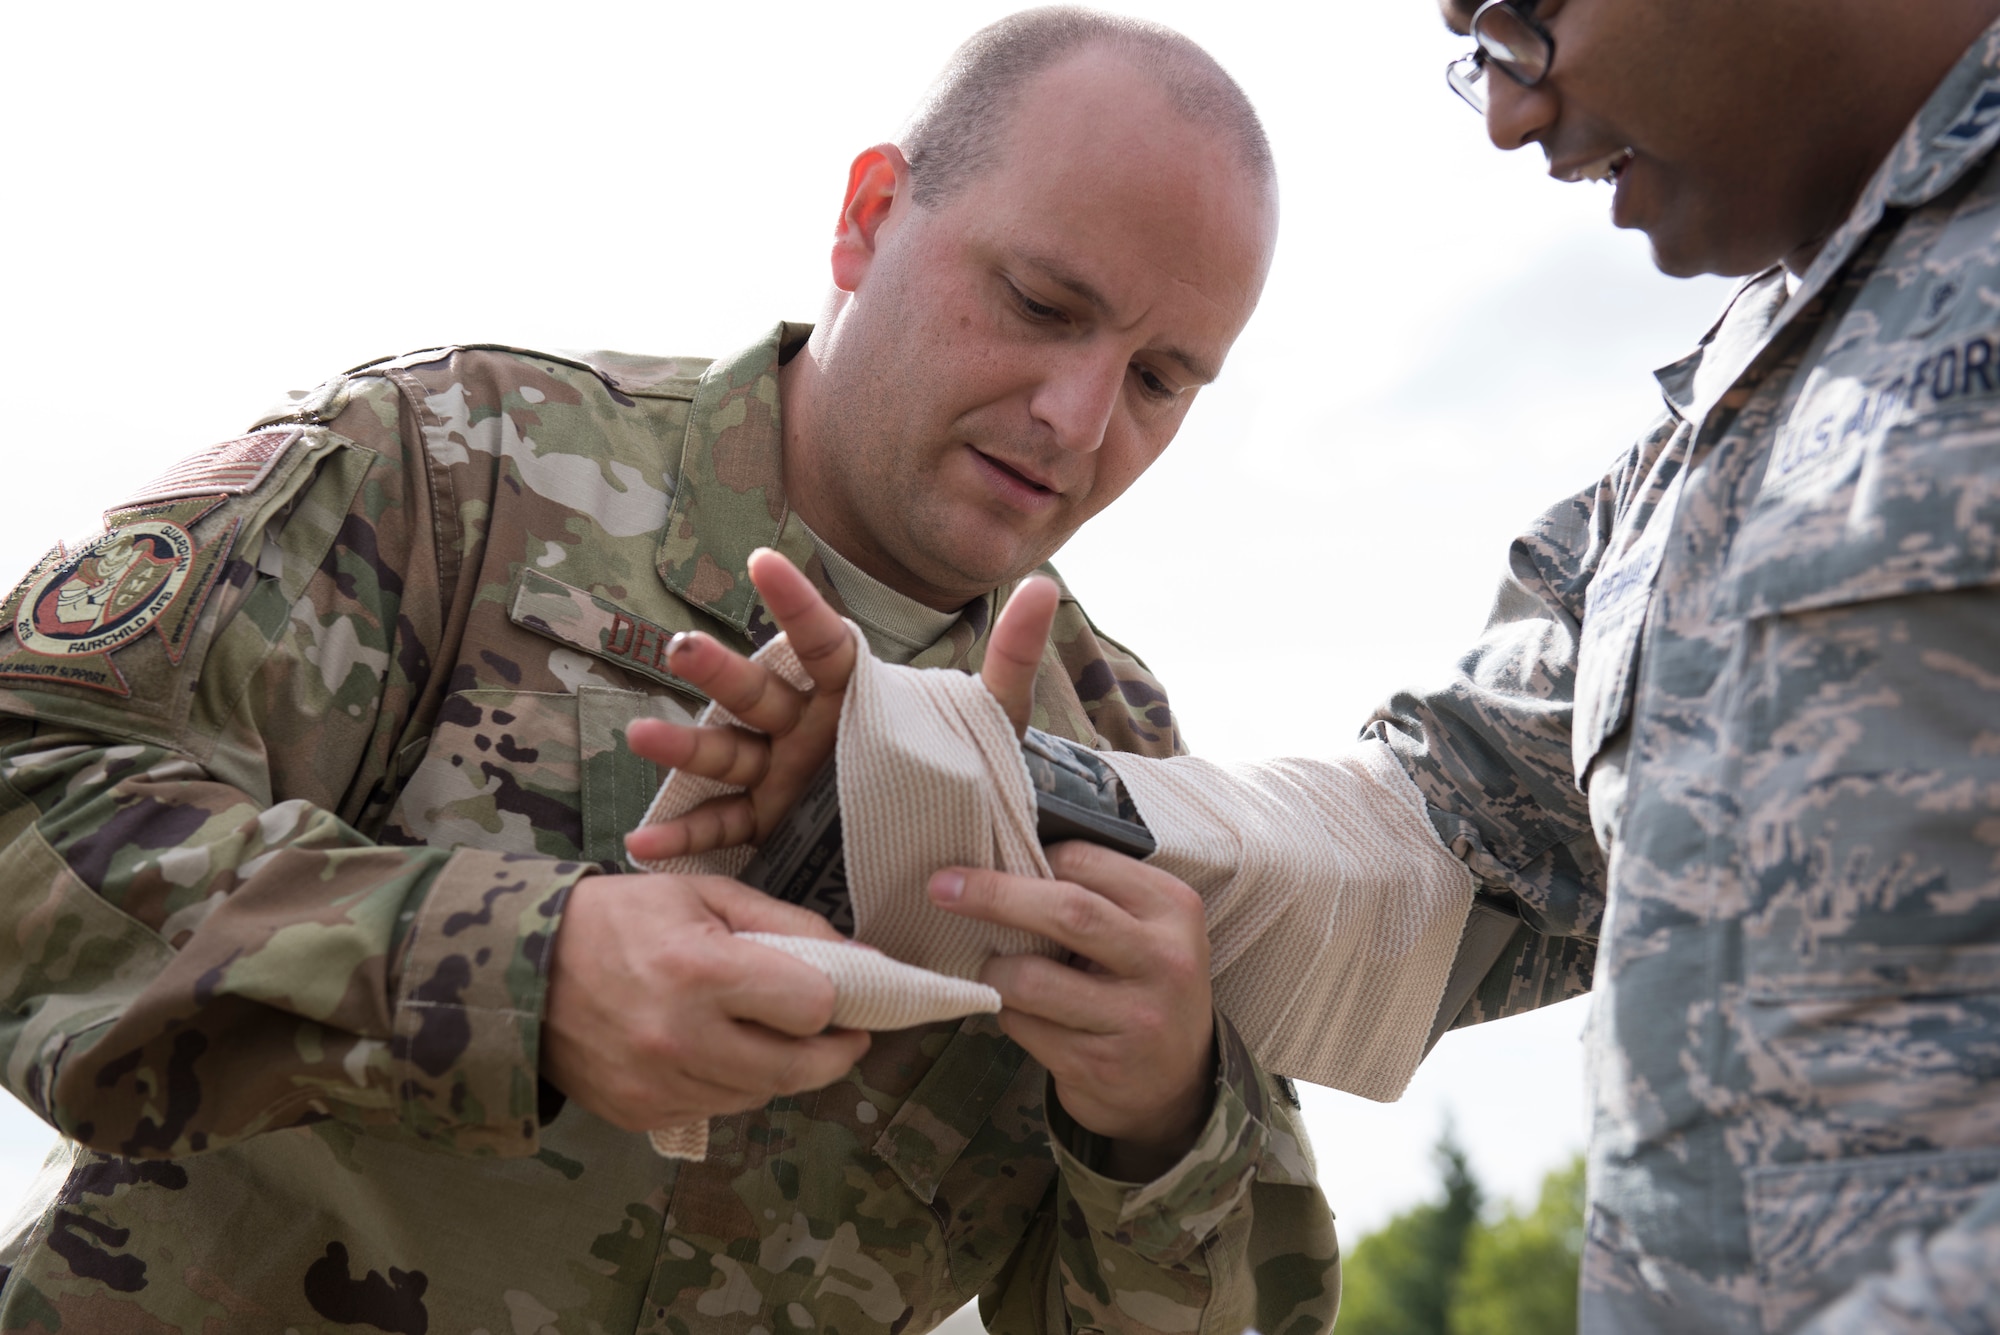 U.S. Air Force 1st Lt. Jeremy Deep, Air Mobility Command aeromedical operations officer, applies a splint to U.S. Air Force Capt. Amaro Mascarenhas, 375th Aeromedical Evacuation Squadron resource management officer, during the Tactical Combat Casualty Care course at Fairchild Air Force Base, Washington, Sept. 12, 2019. The TCCC is the replacement for the former Self-Aid Buddy Care first aid training and will become the new standard across all U.S. military service branches. (U.S. Air Force photo by Senior Airman Ryan Lackey)